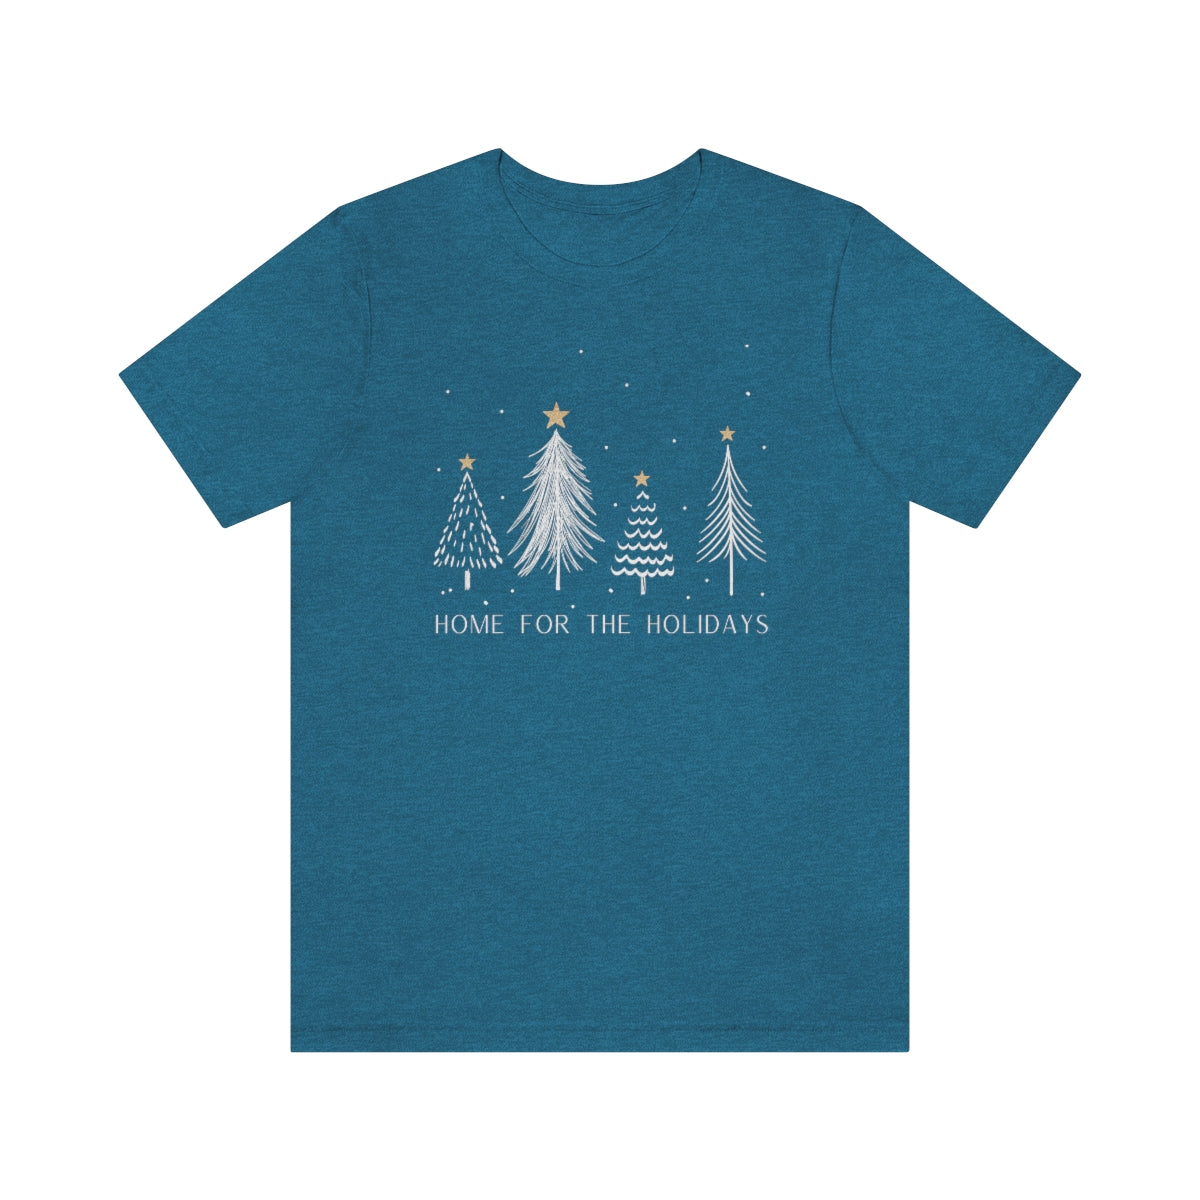 Home For The Holidays Shirt, White Christmas Trees, Gold Stars, Snow